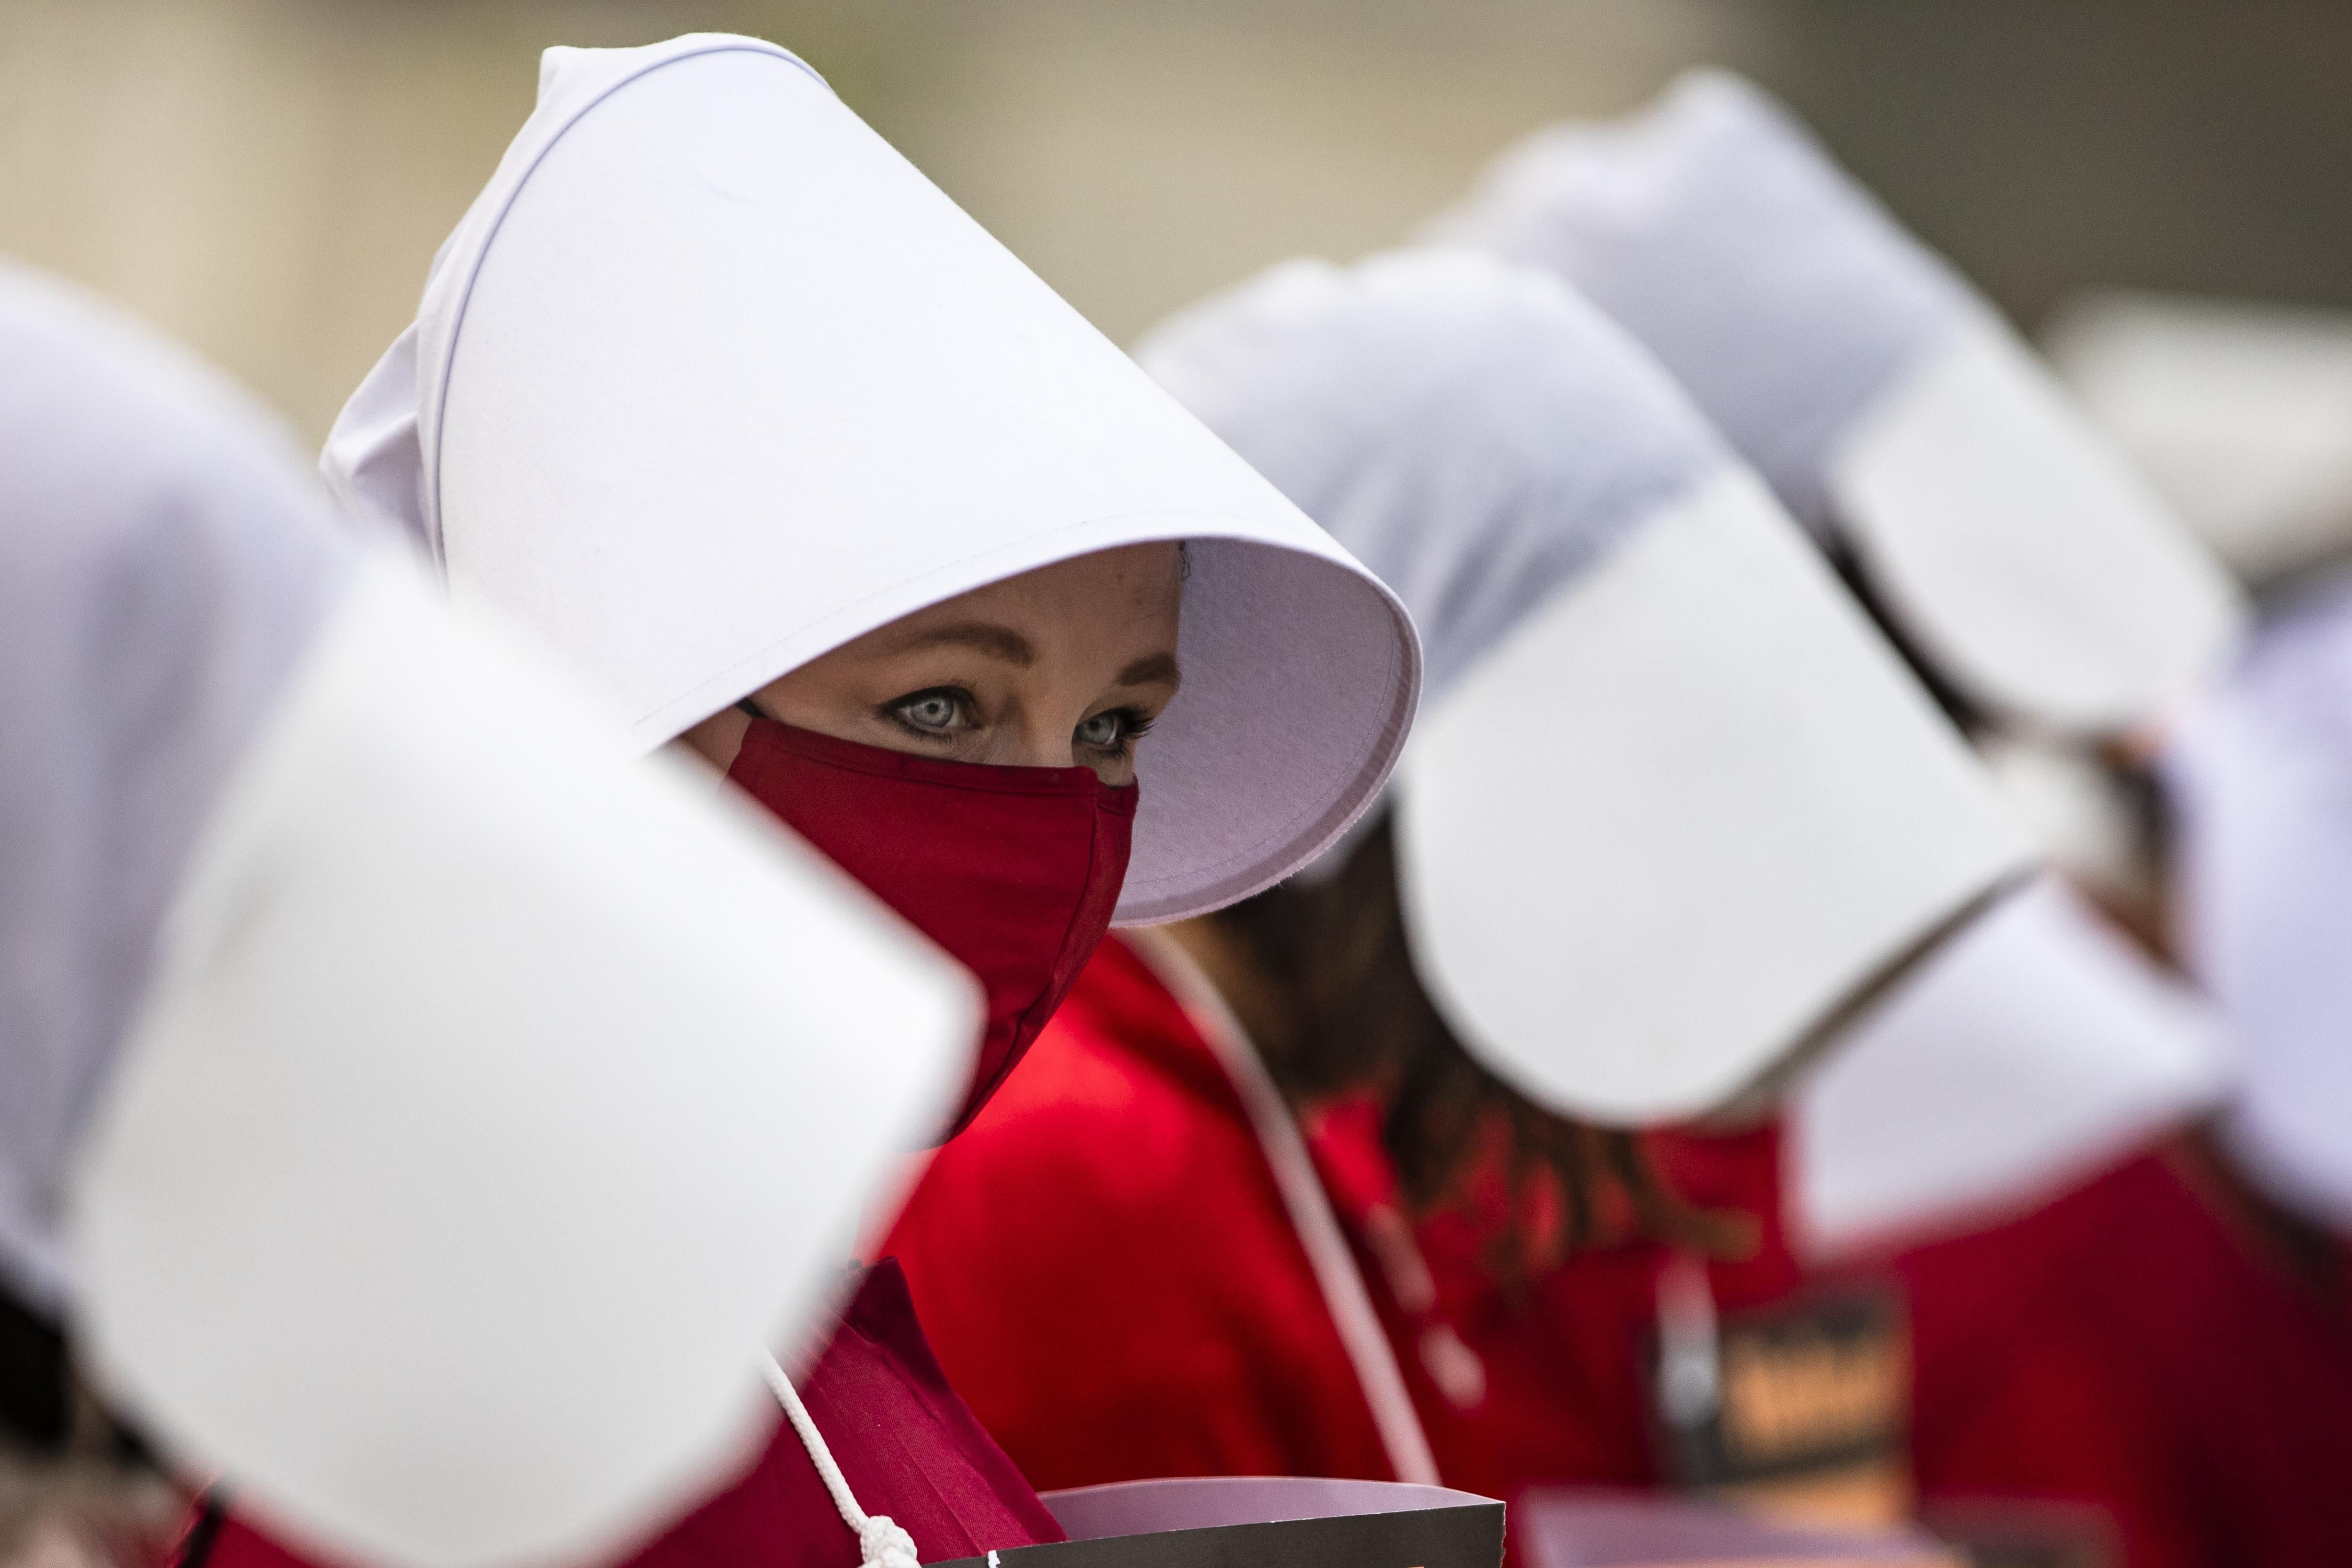 In a line of women wearing large white bonnets, one woman peeks over her red mask.